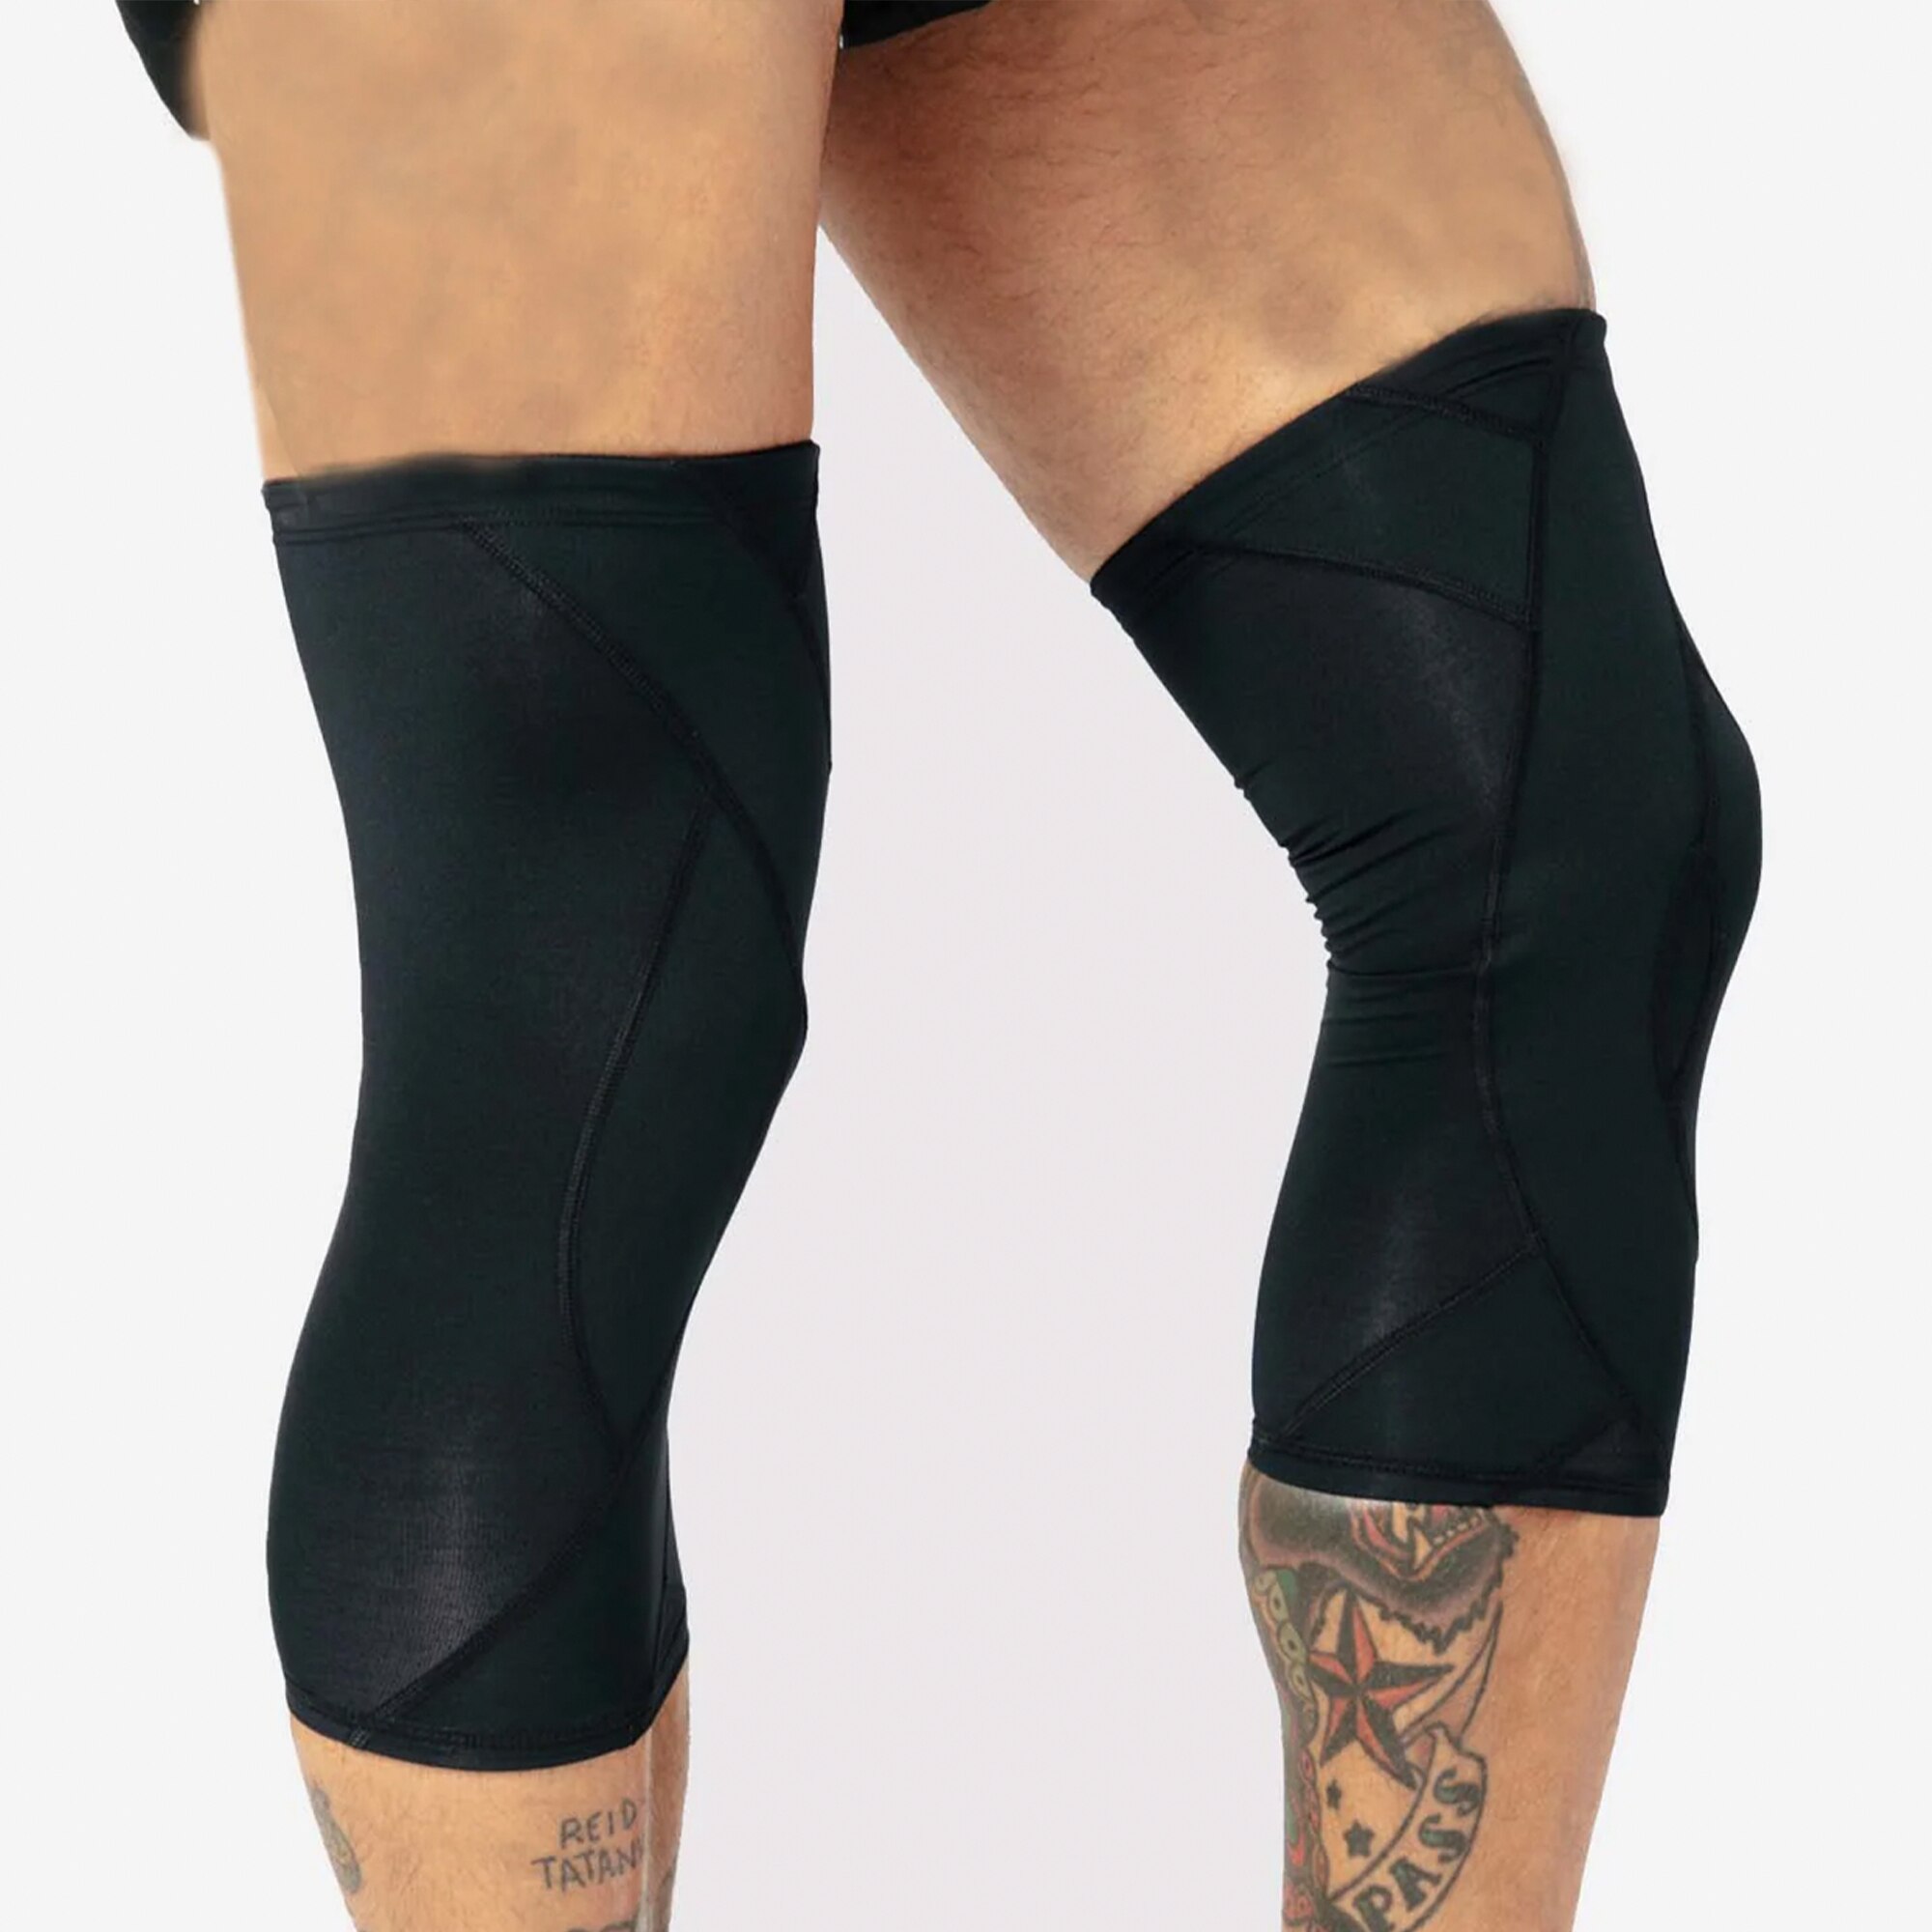 DNFD Active AX Compression Knee Sleeves, Large , CVS